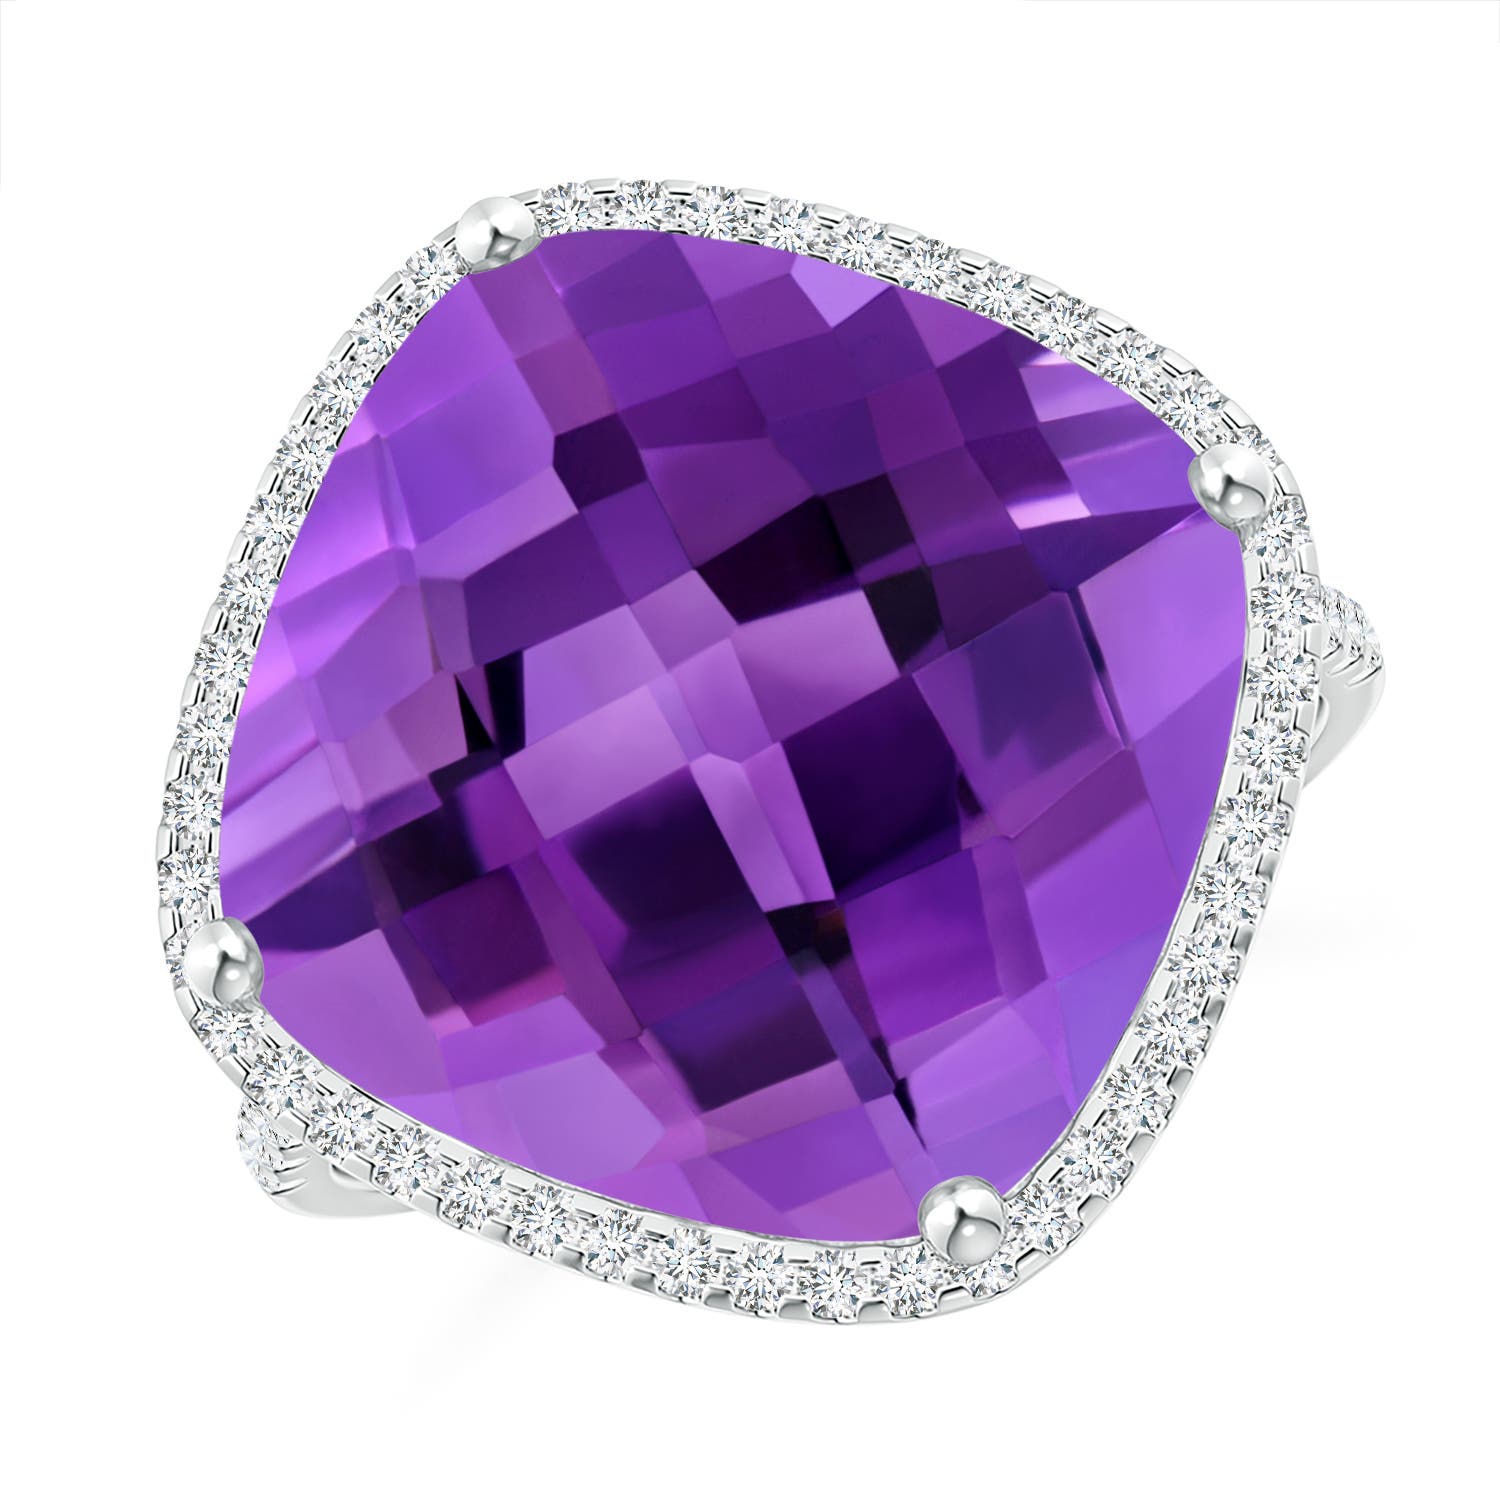 AAA - Amethyst / 11.39 CT / 14 KT White Gold